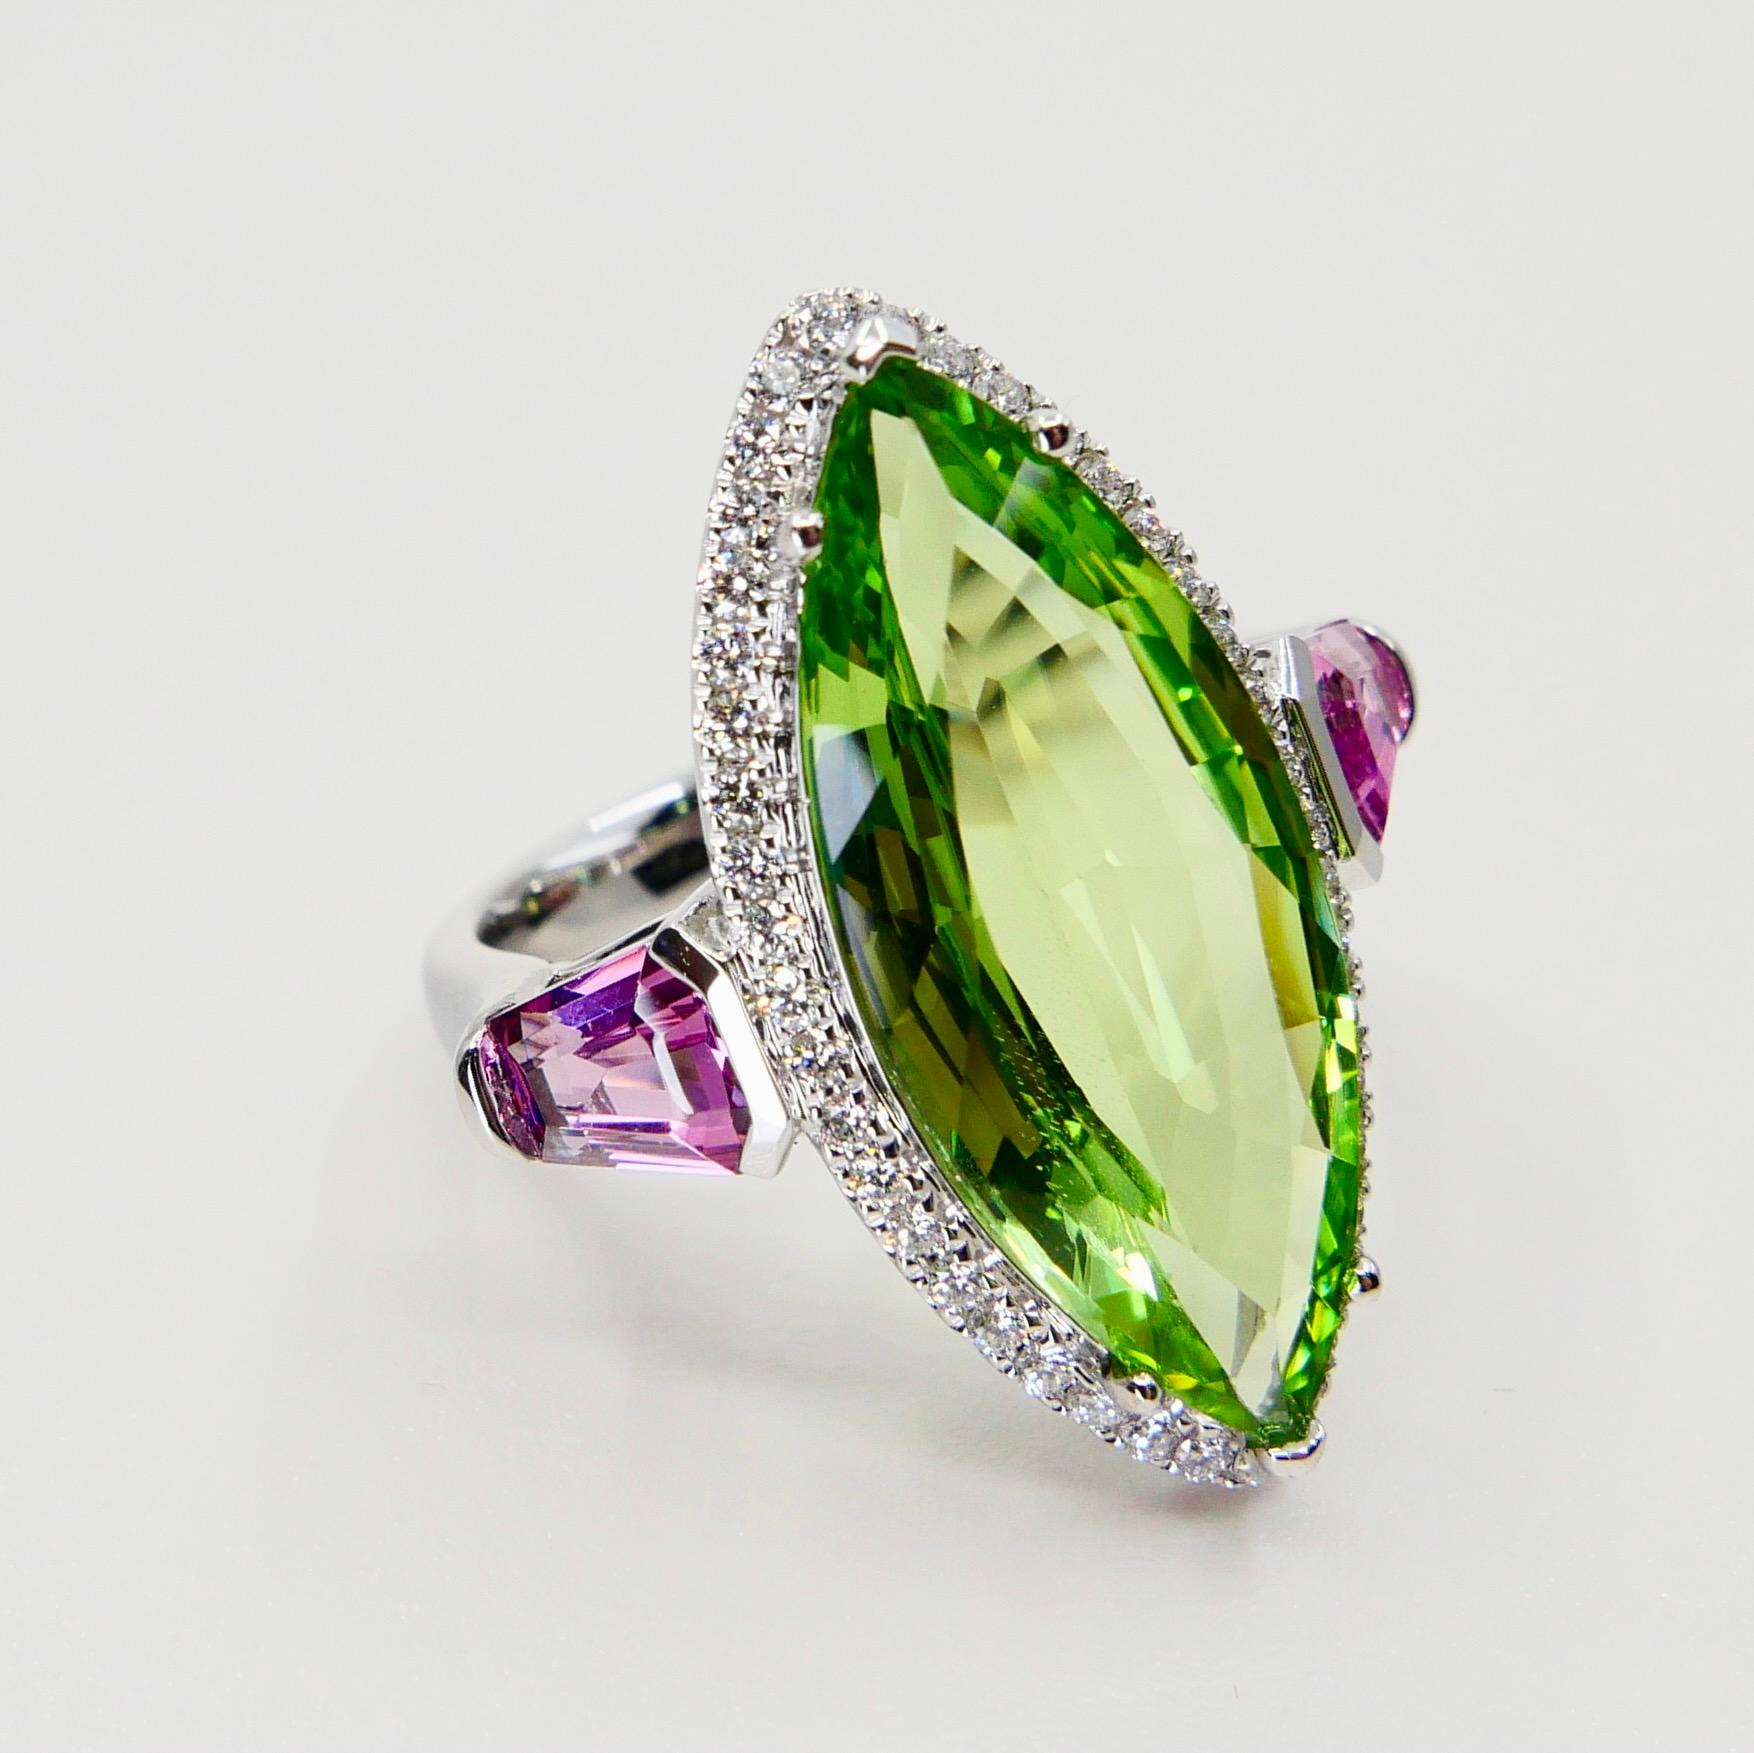 Natural Peridot 7.38 Cts, Pink Spinel & Diamond Cocktail Ring, Statement Piece 5